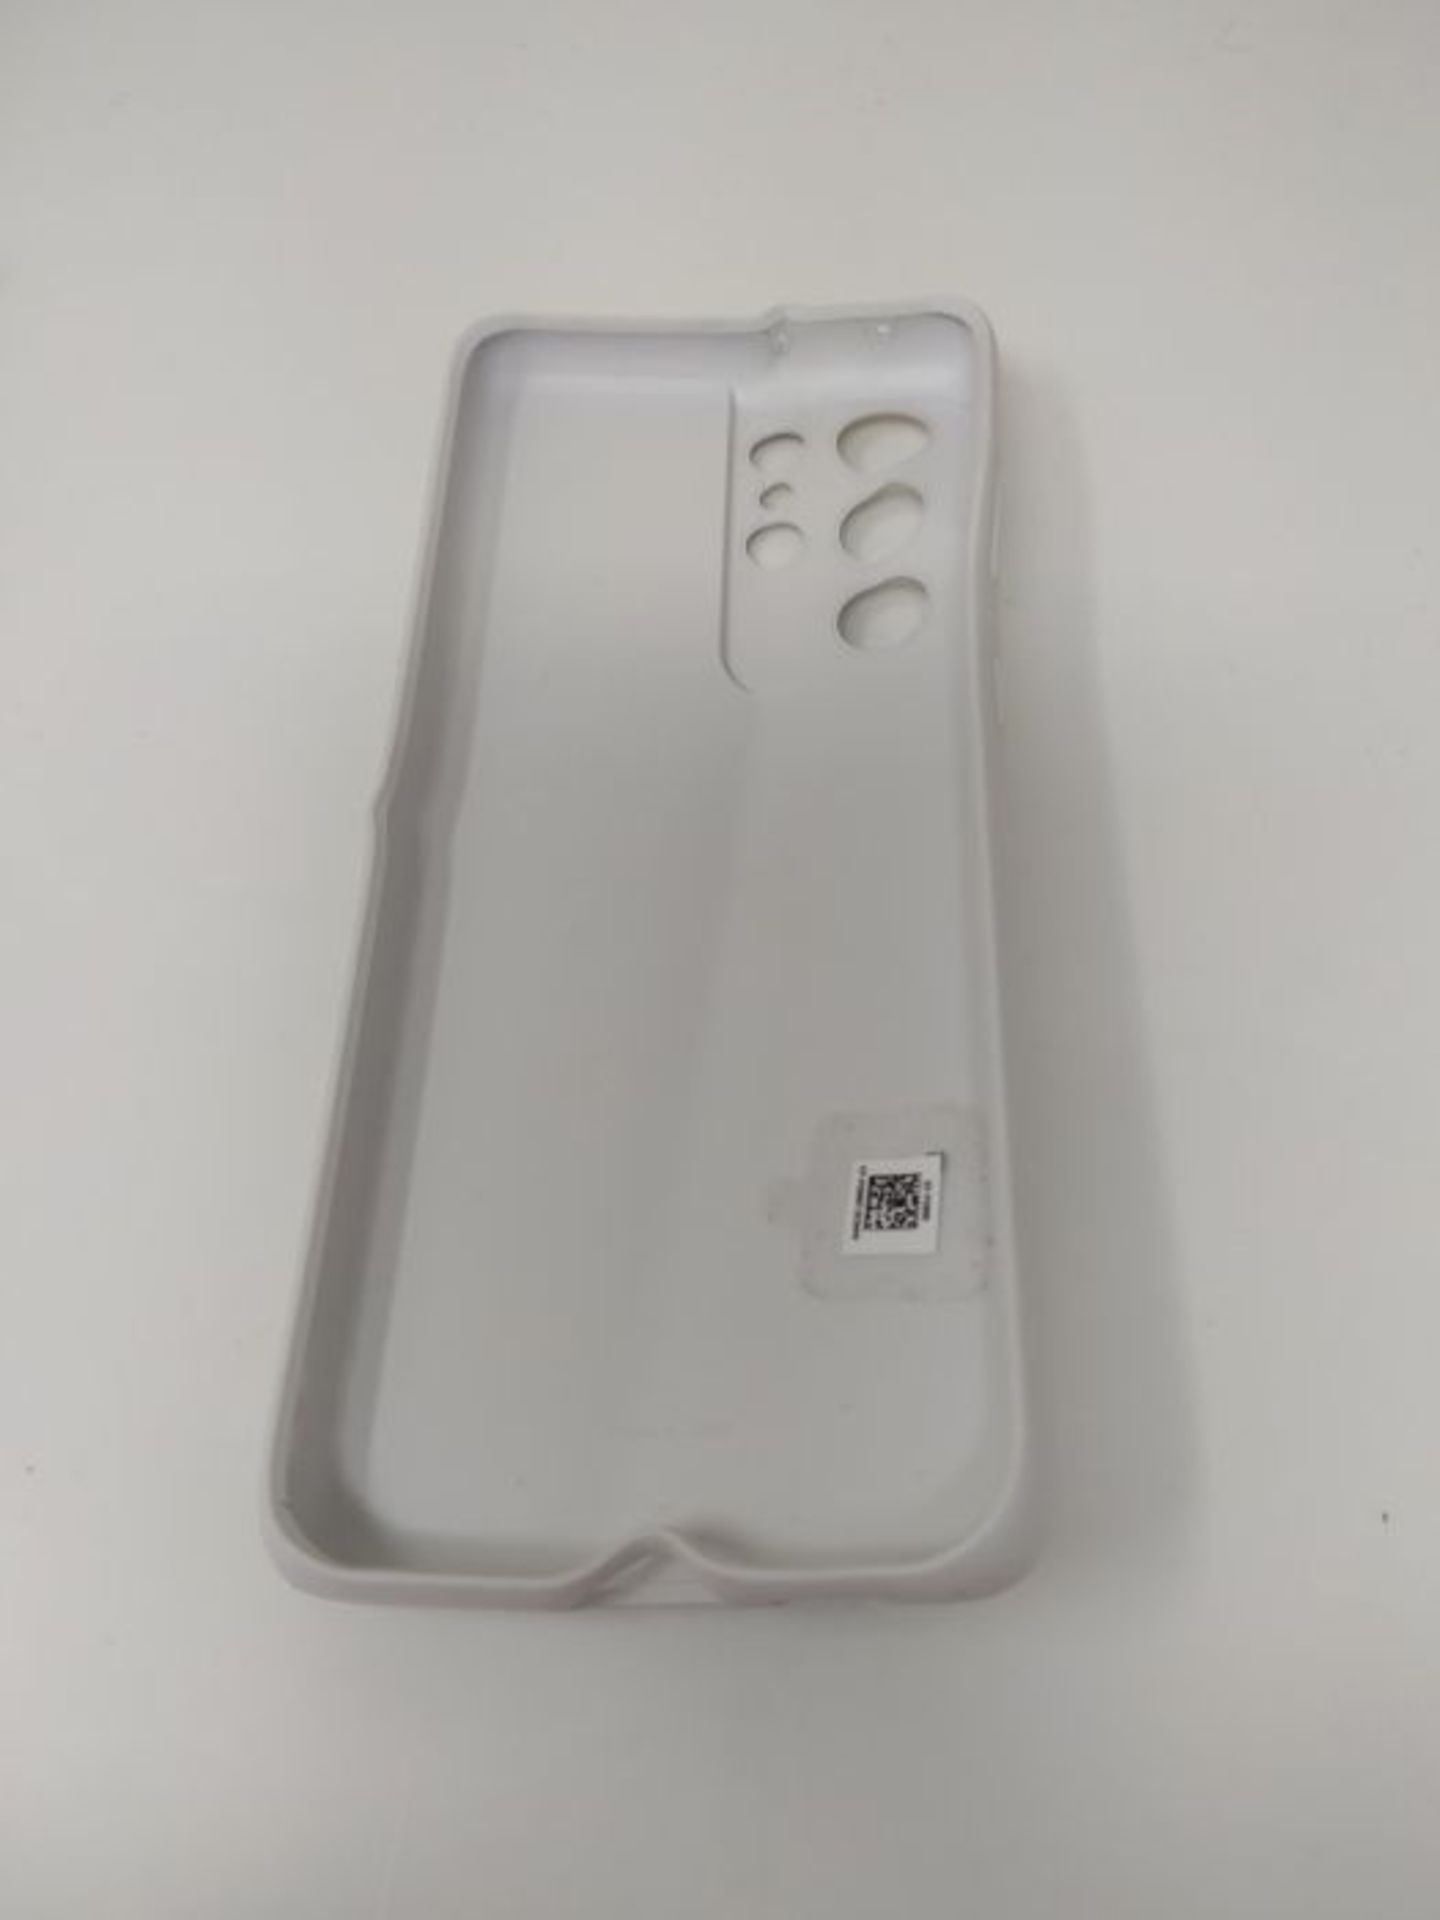 Samsung Galaxy S21 Ultra 5G Silicone Cover Light Gray - 6.8 inches - Image 2 of 4